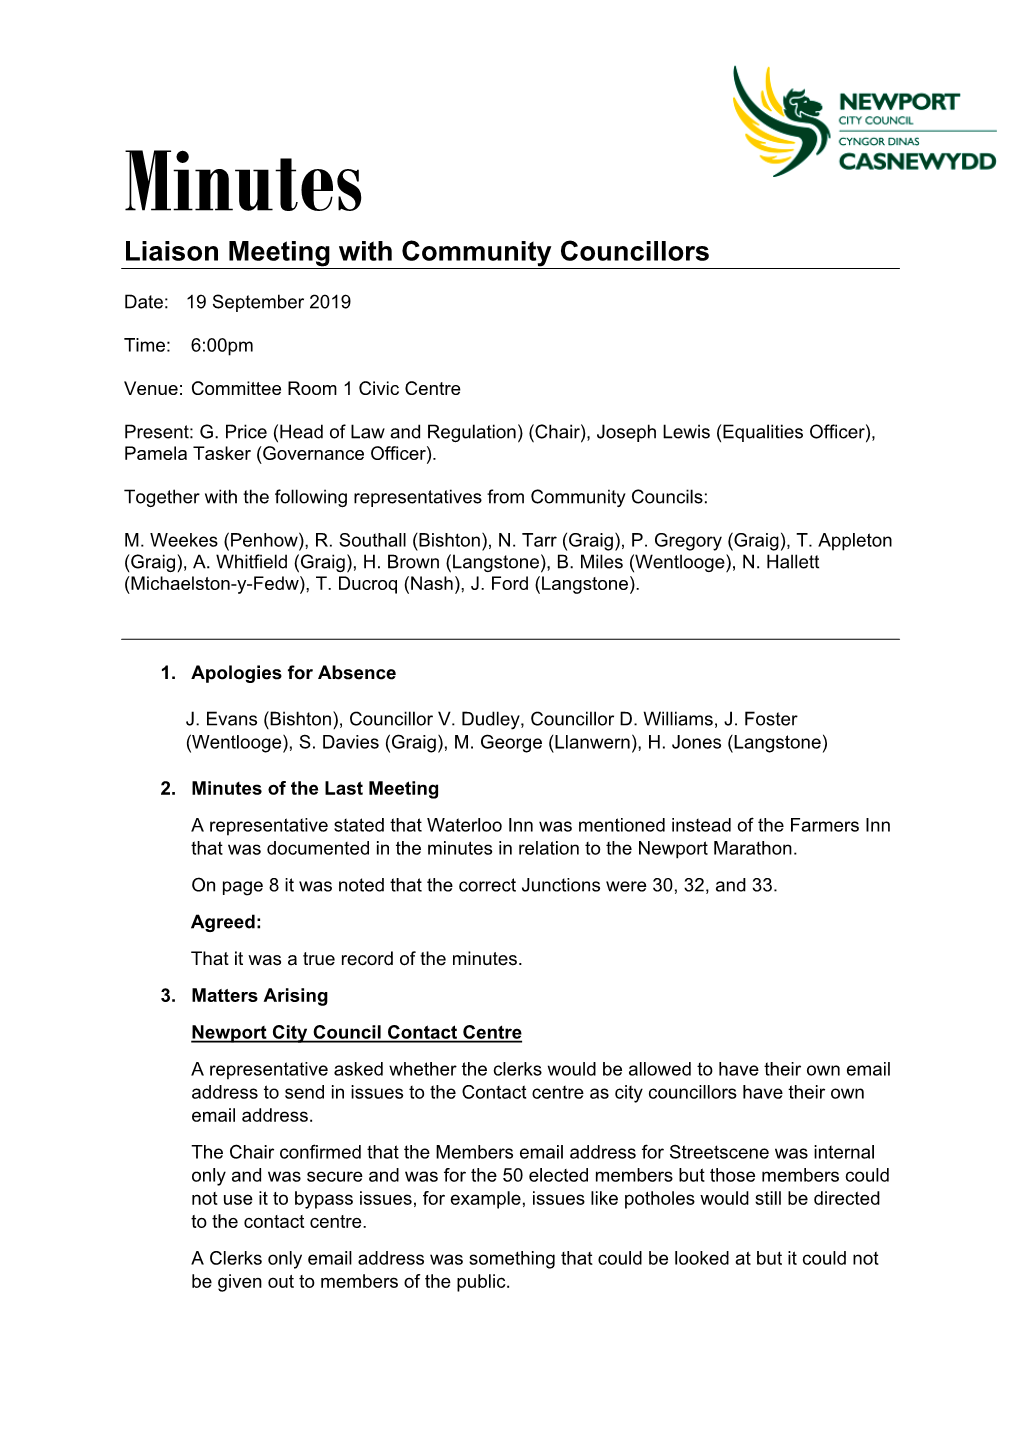 Minutes Liaison Meeting with Community Councillors